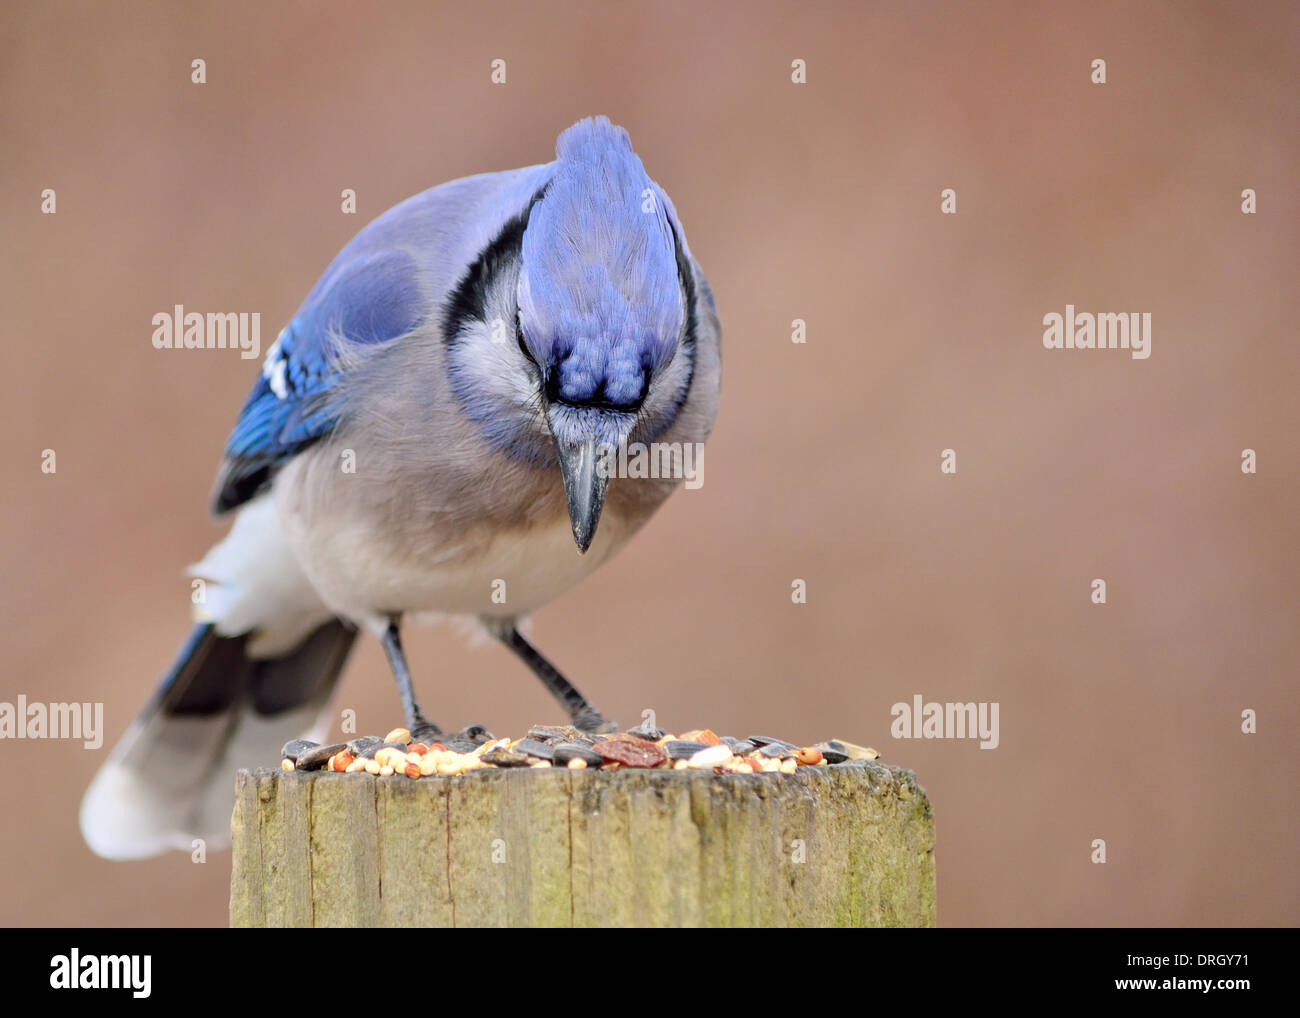 A blue jay perched on a post with bird seed. Stock Photo